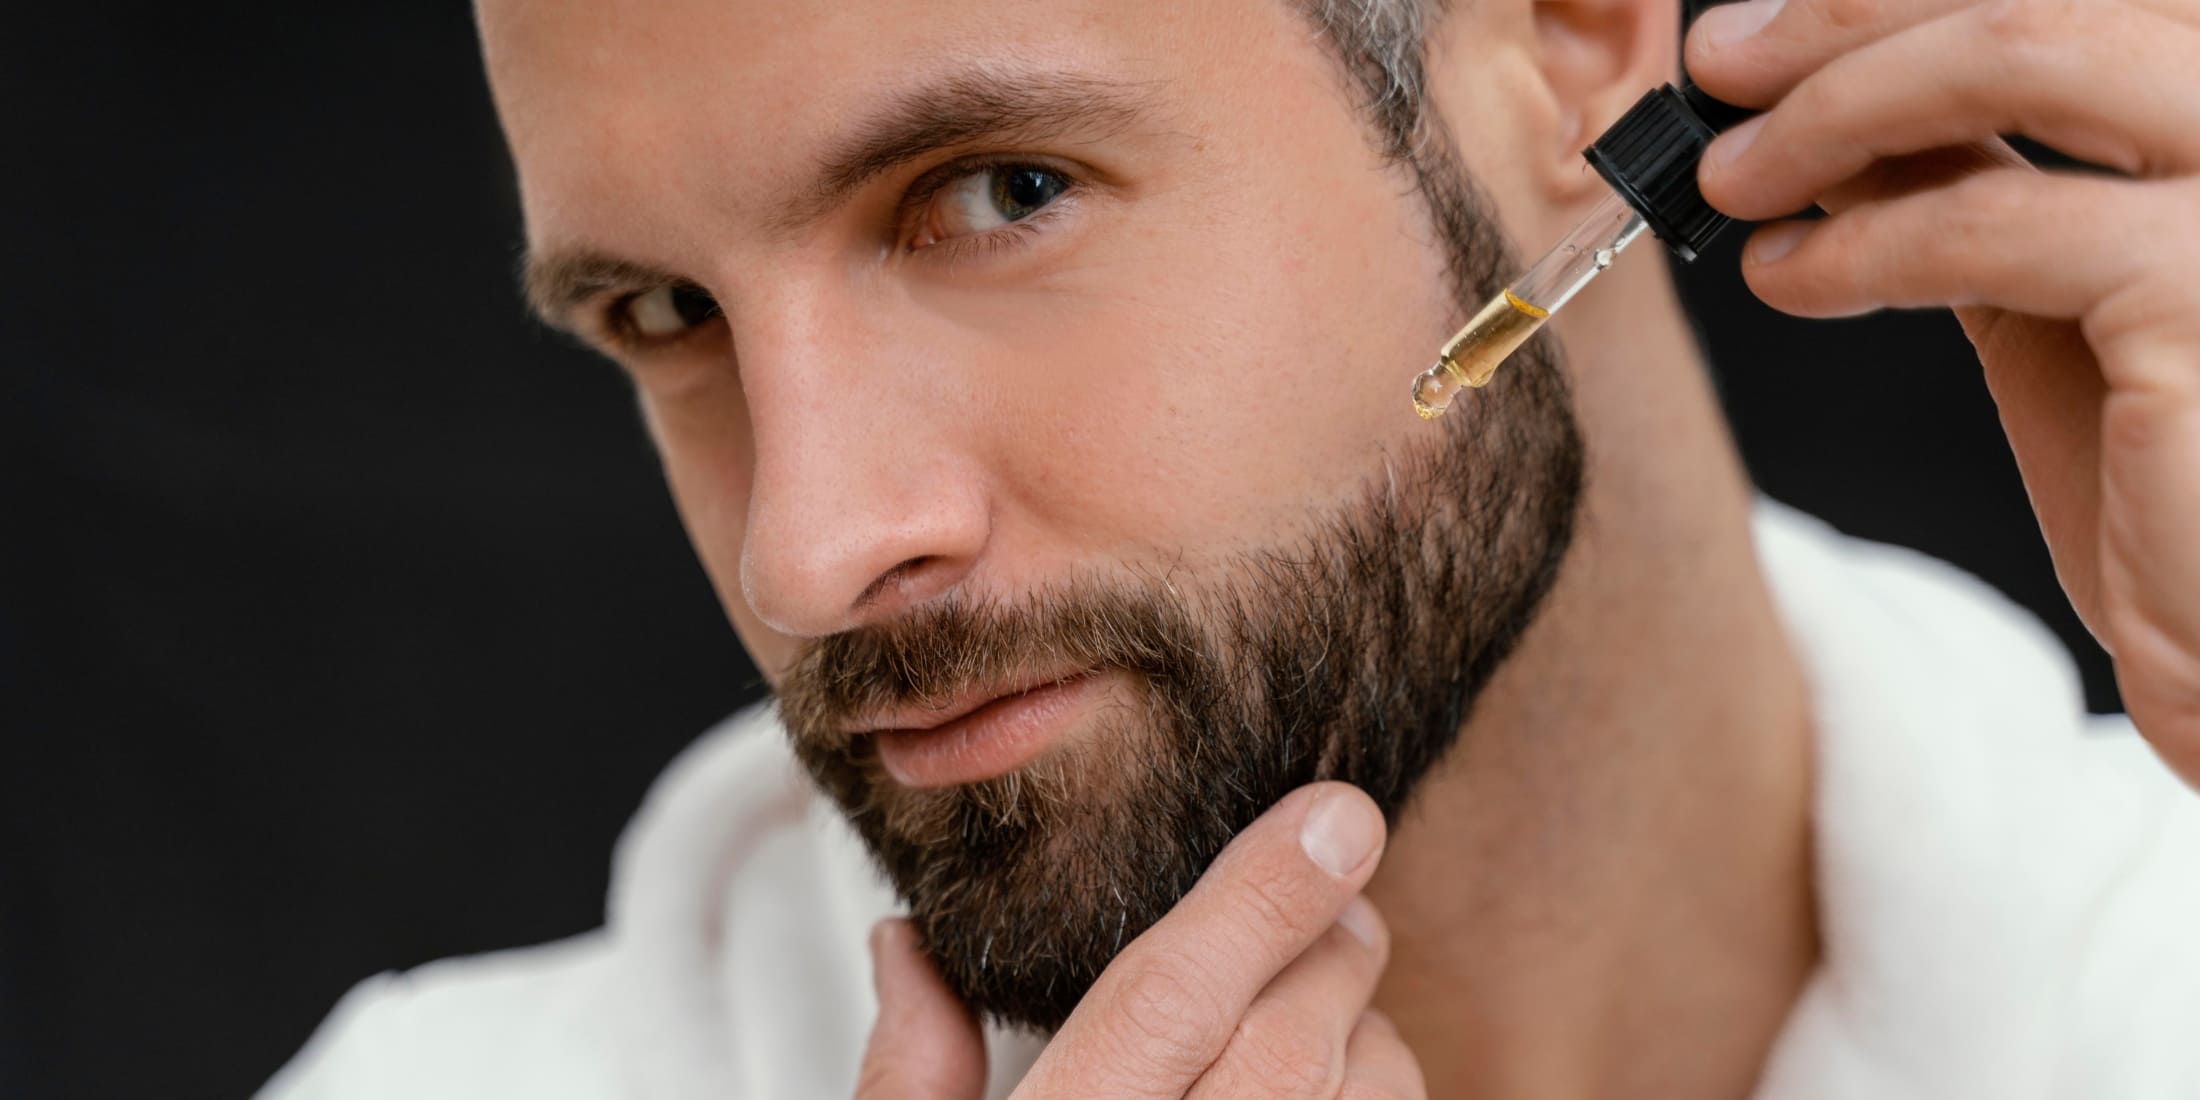 A close-up of a man with a styled beard applying beard oil with a dropper, demonstrating the routine of how often you should apply beard oil for maintaining beard health and style.